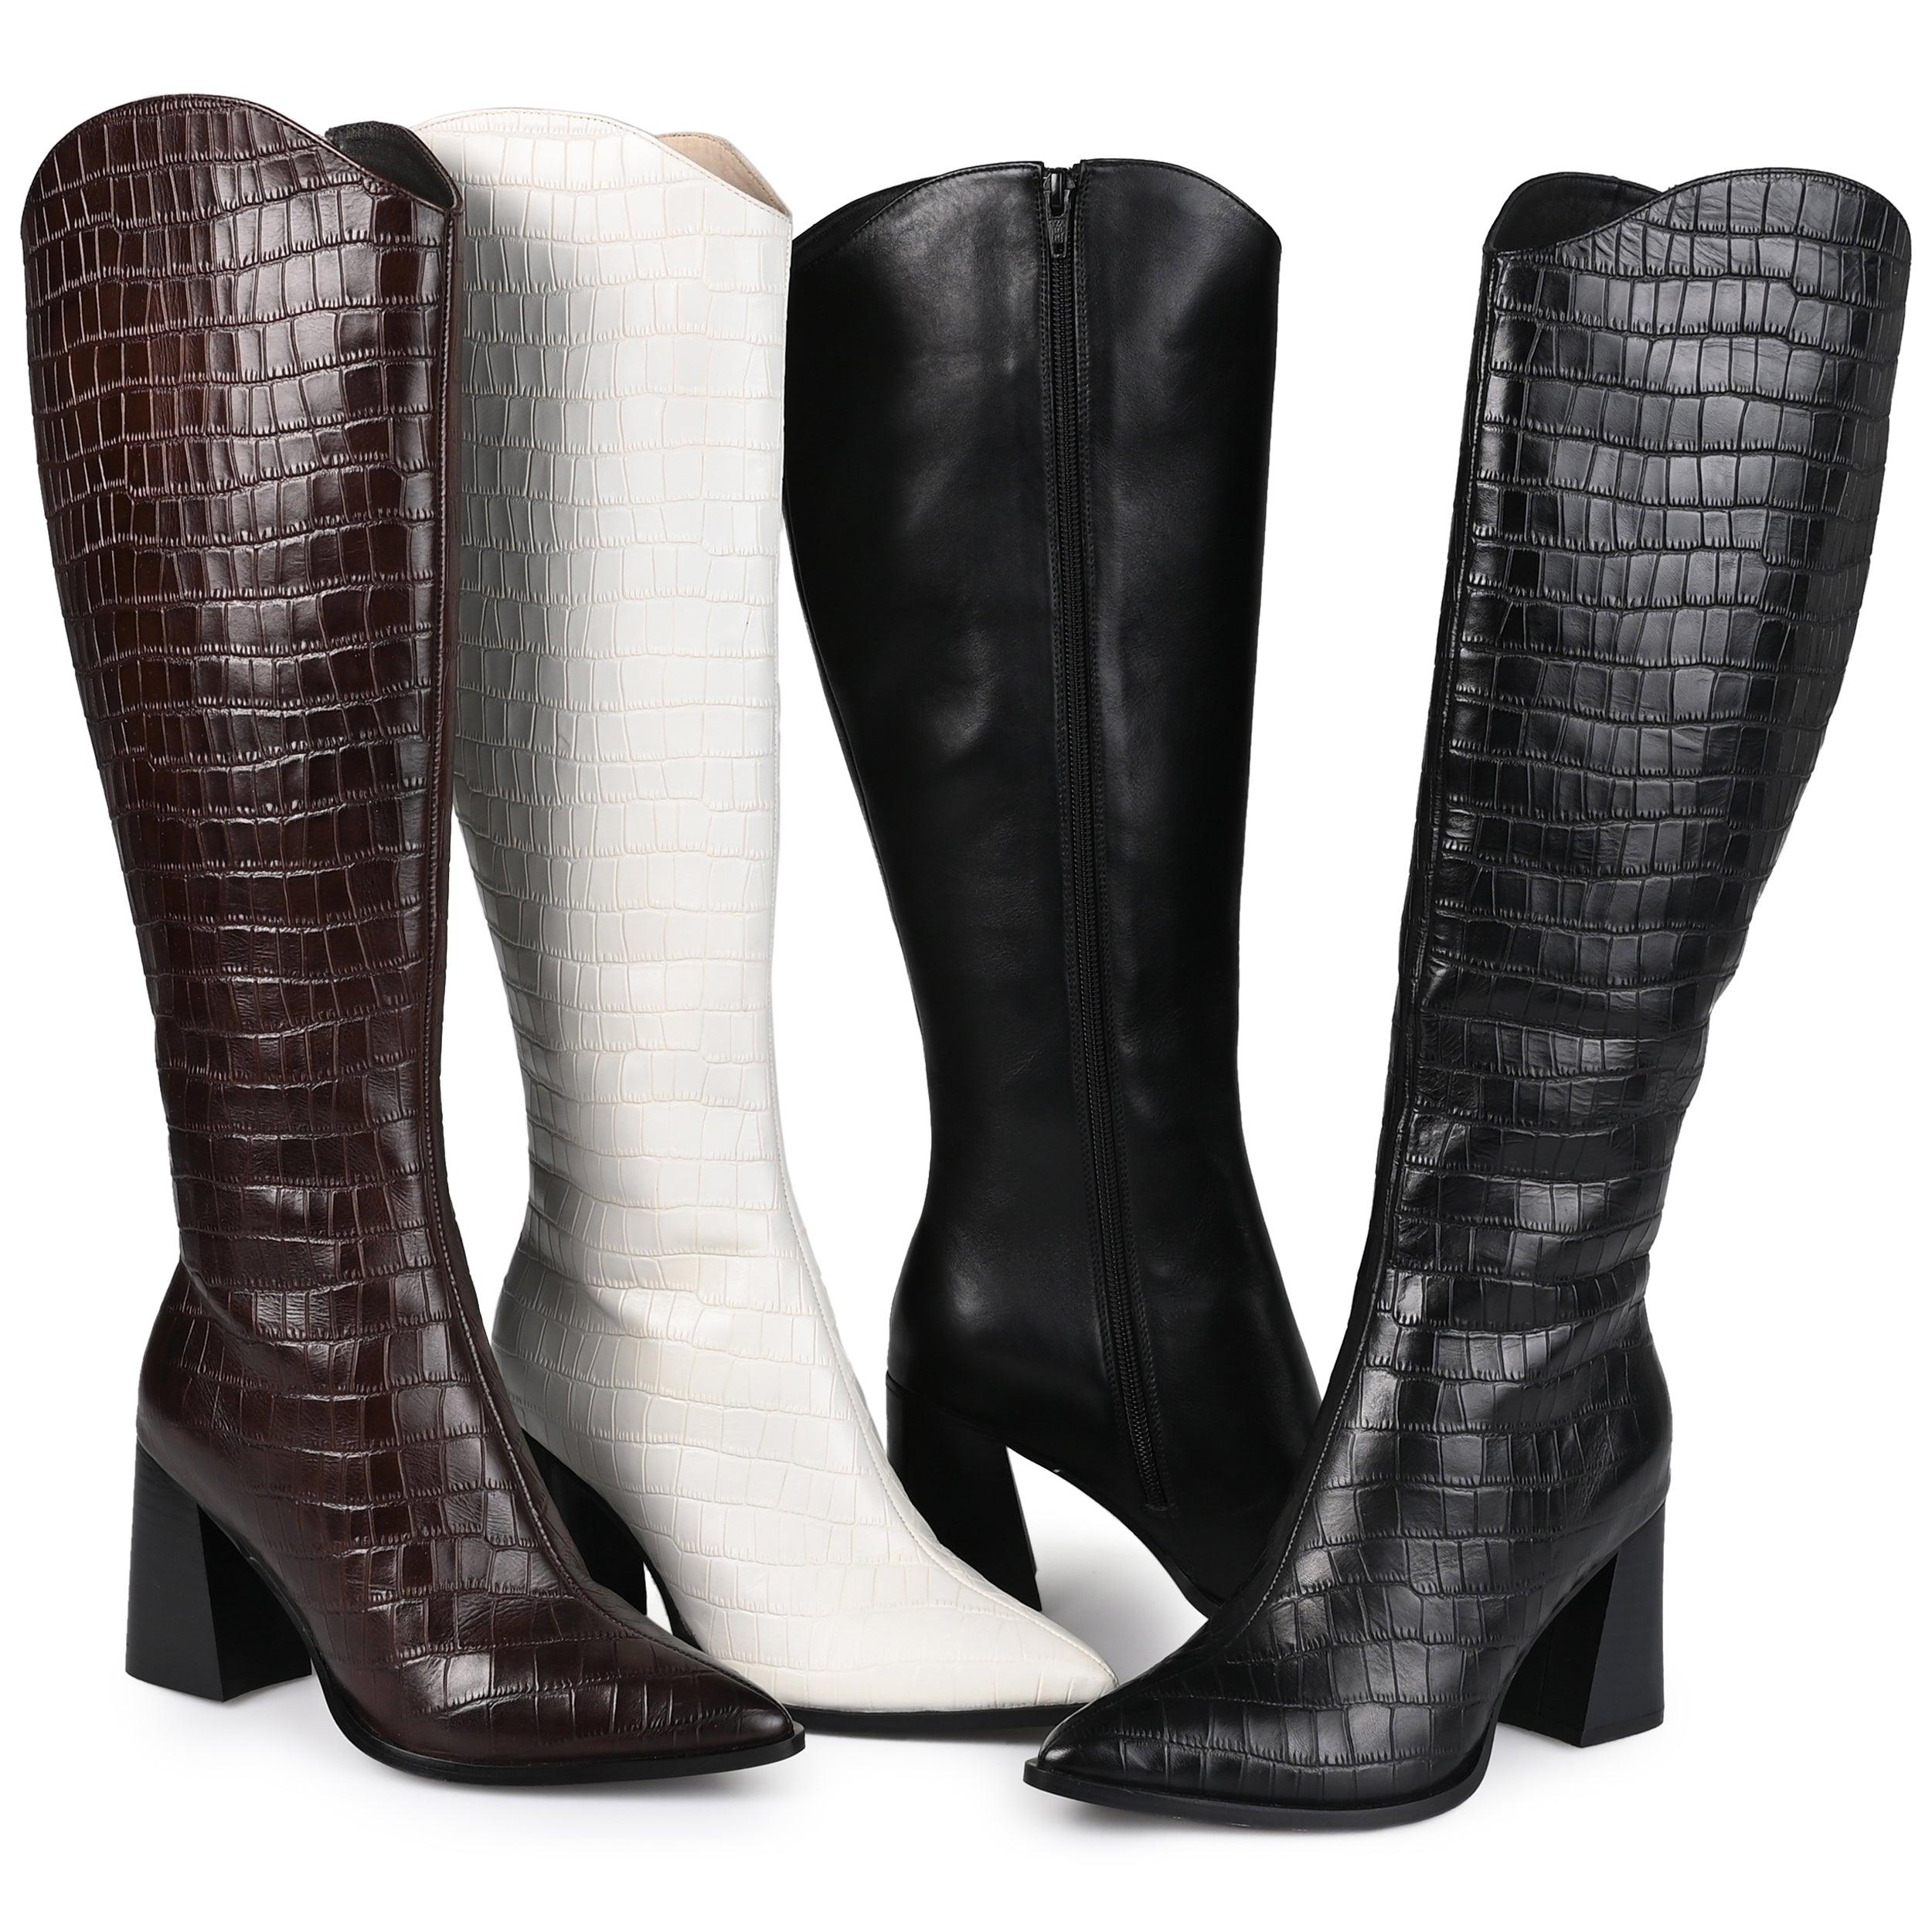 Wide calf boots for plus size legs from Wide Calf Boots Store - Love Leah